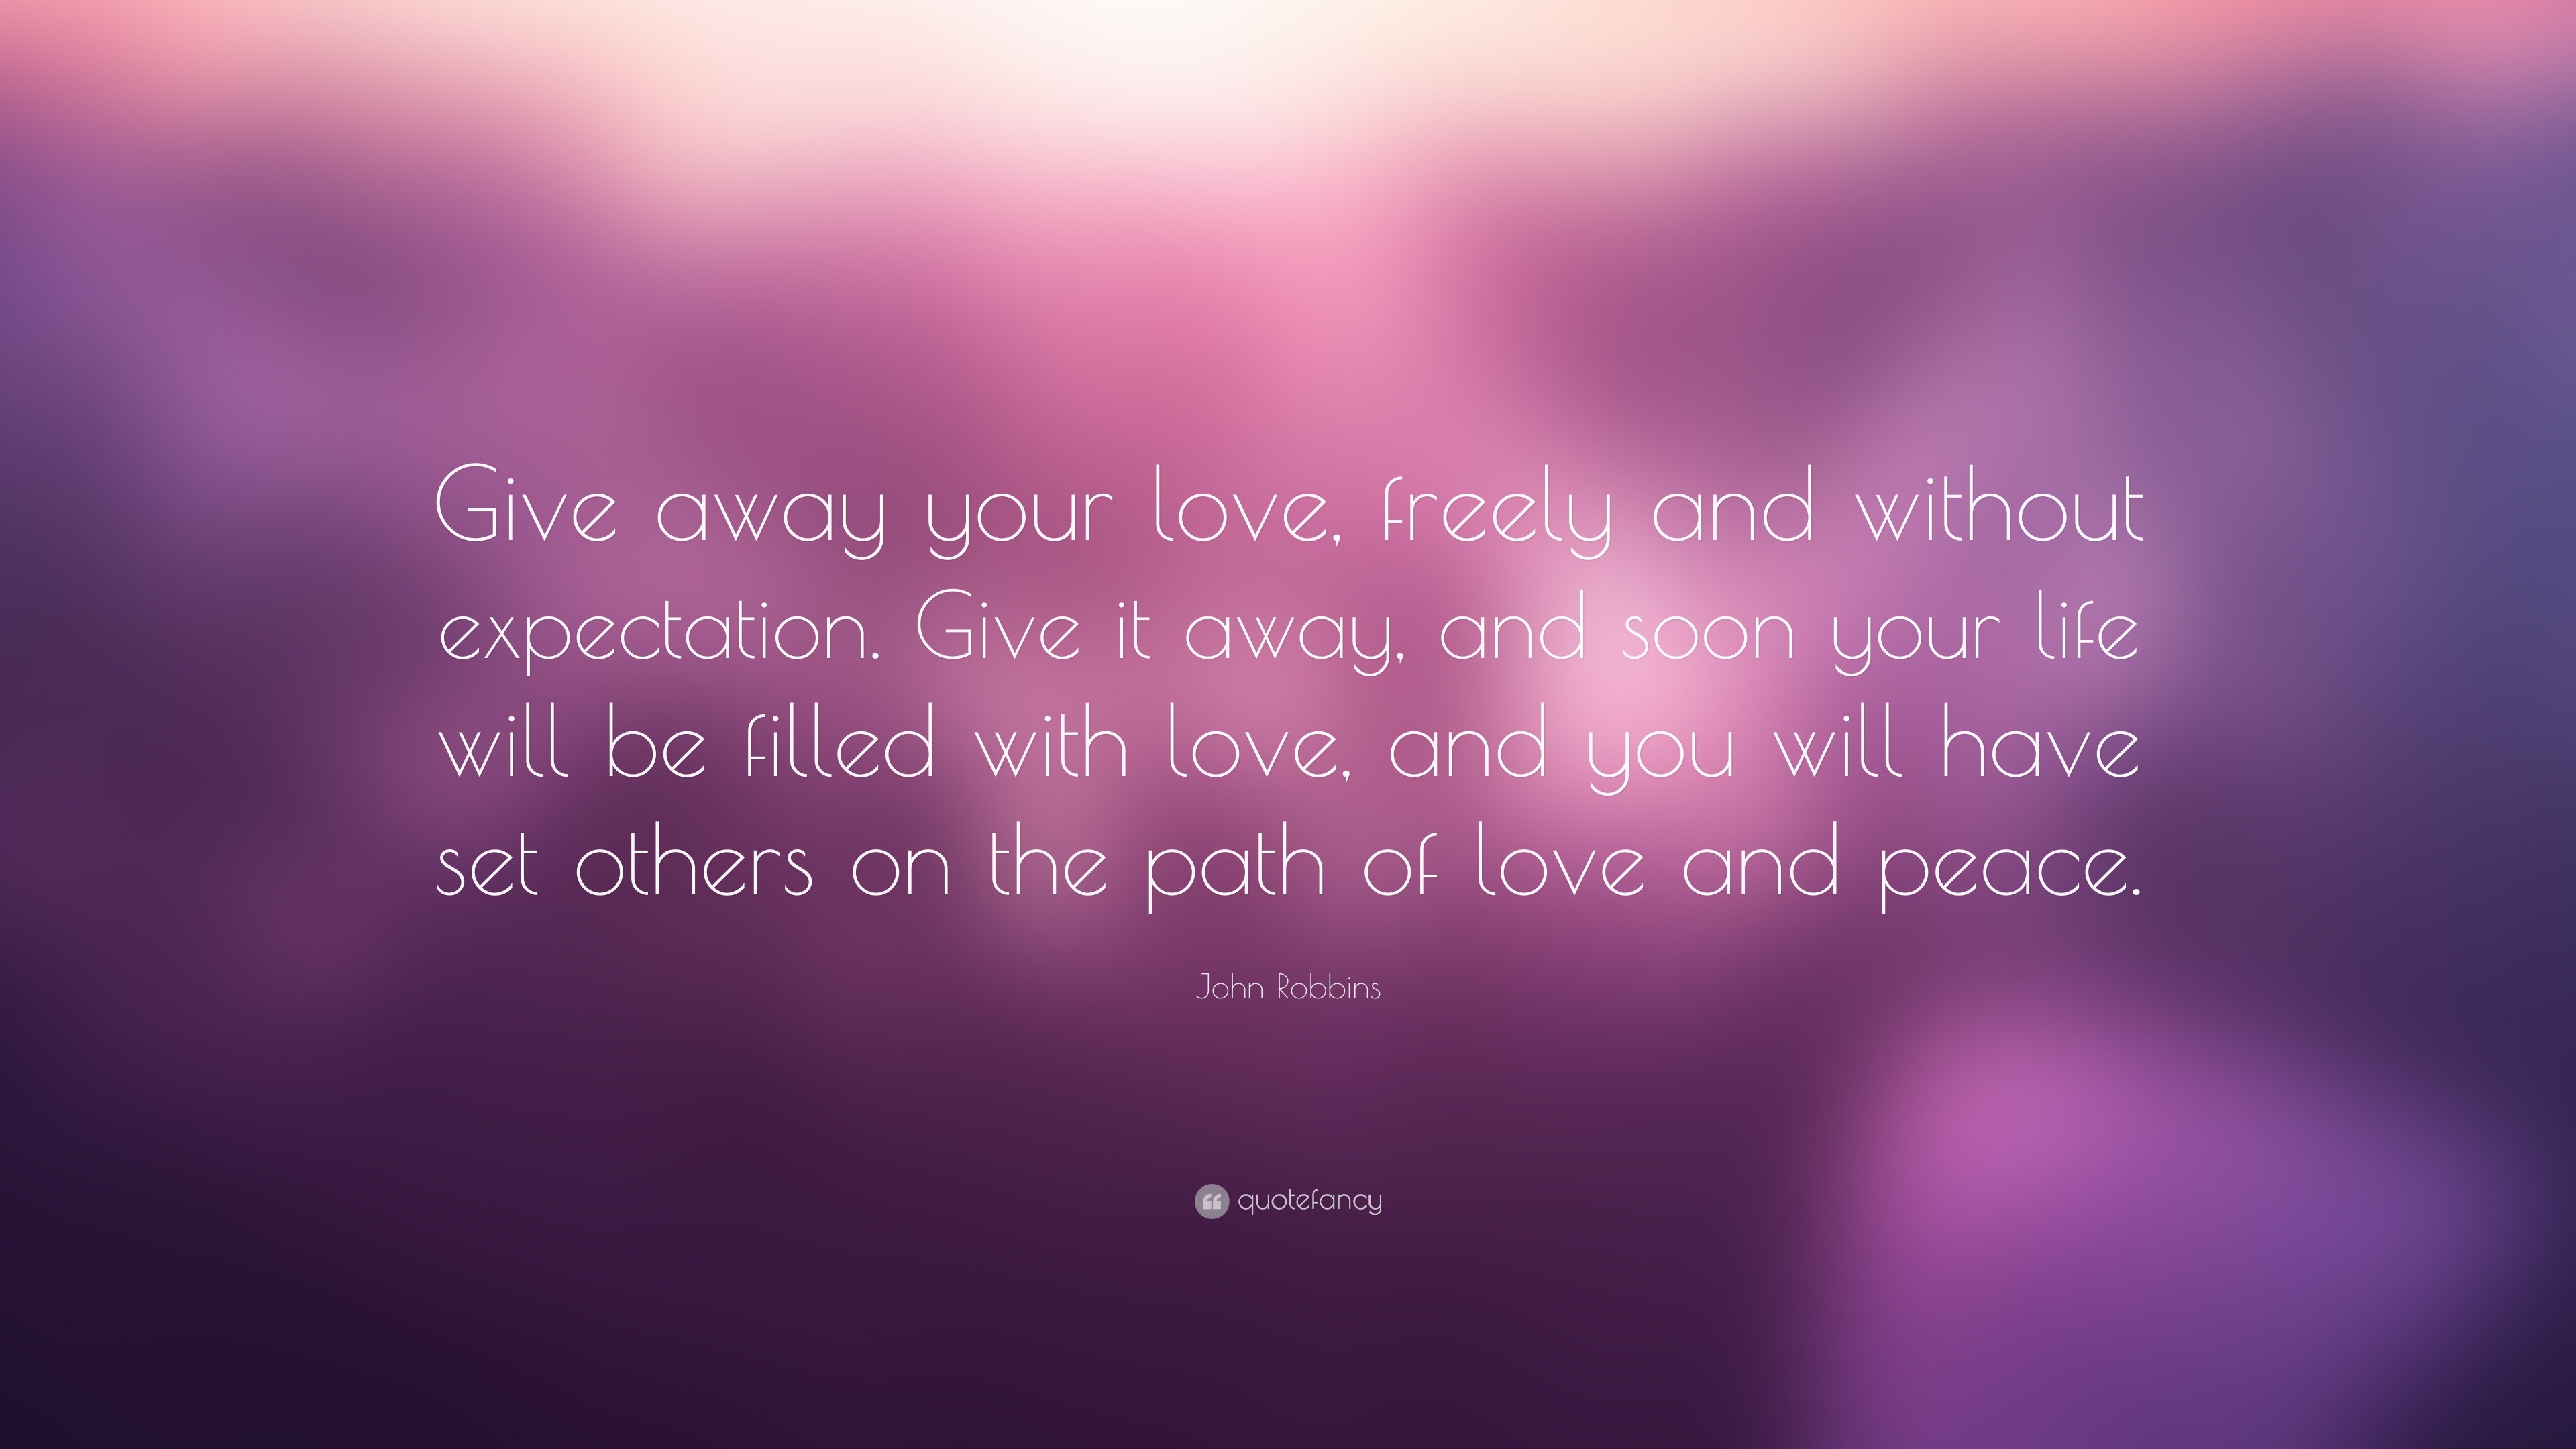 John Robbins Quote: “Give away your love, freely and without ...